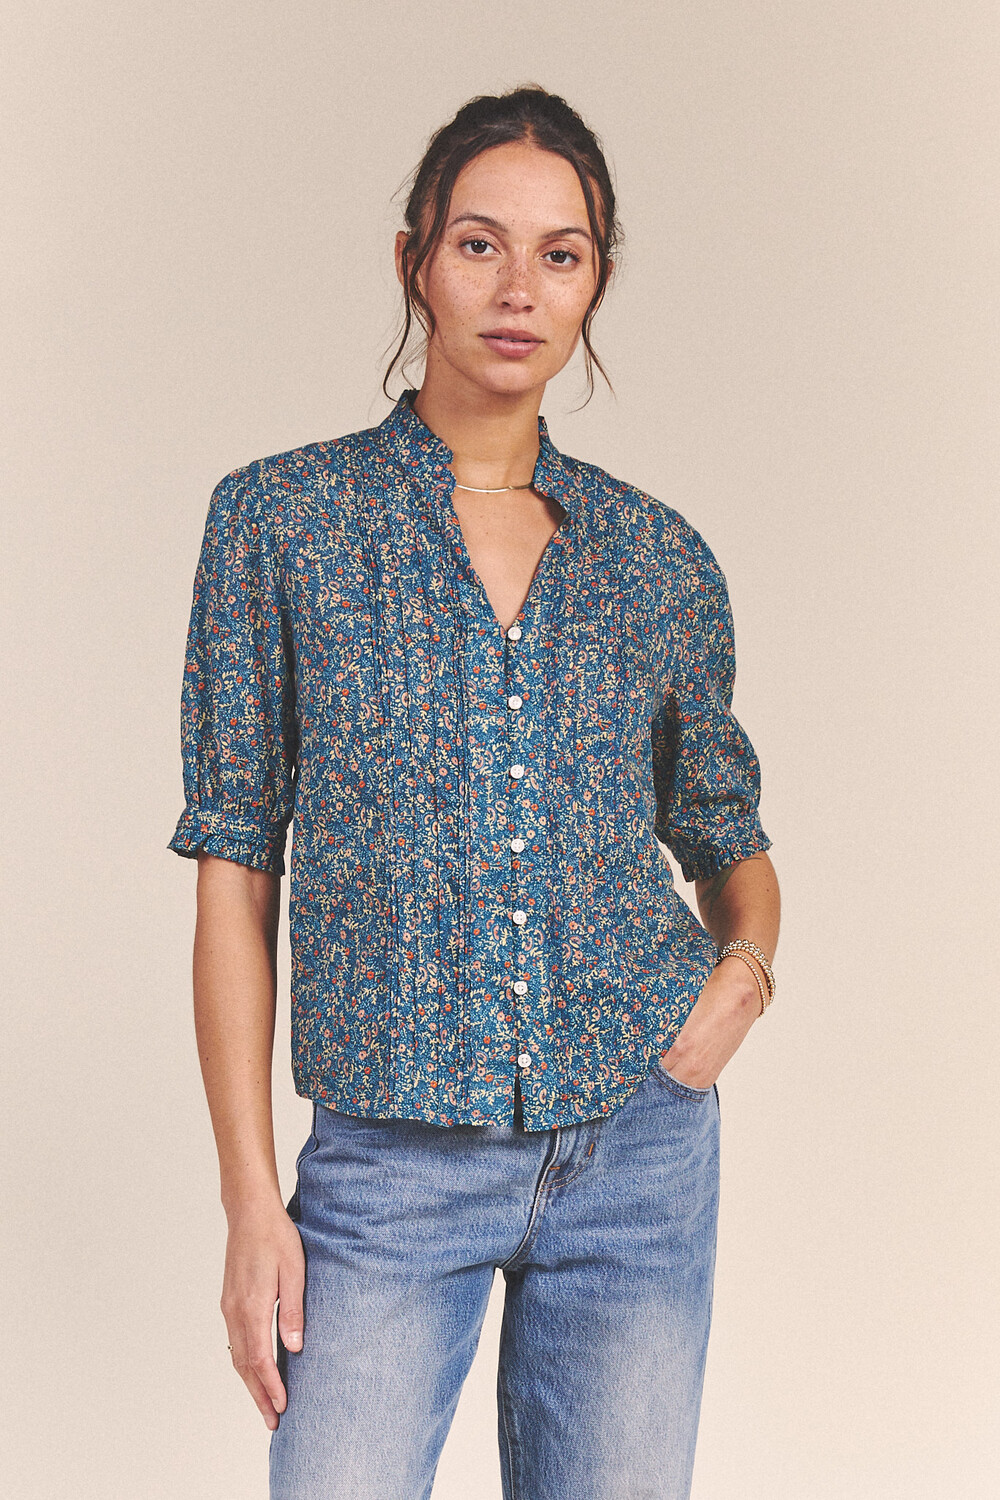 Trovata Eloise Pintuck Blouse in Pacific Ditsy